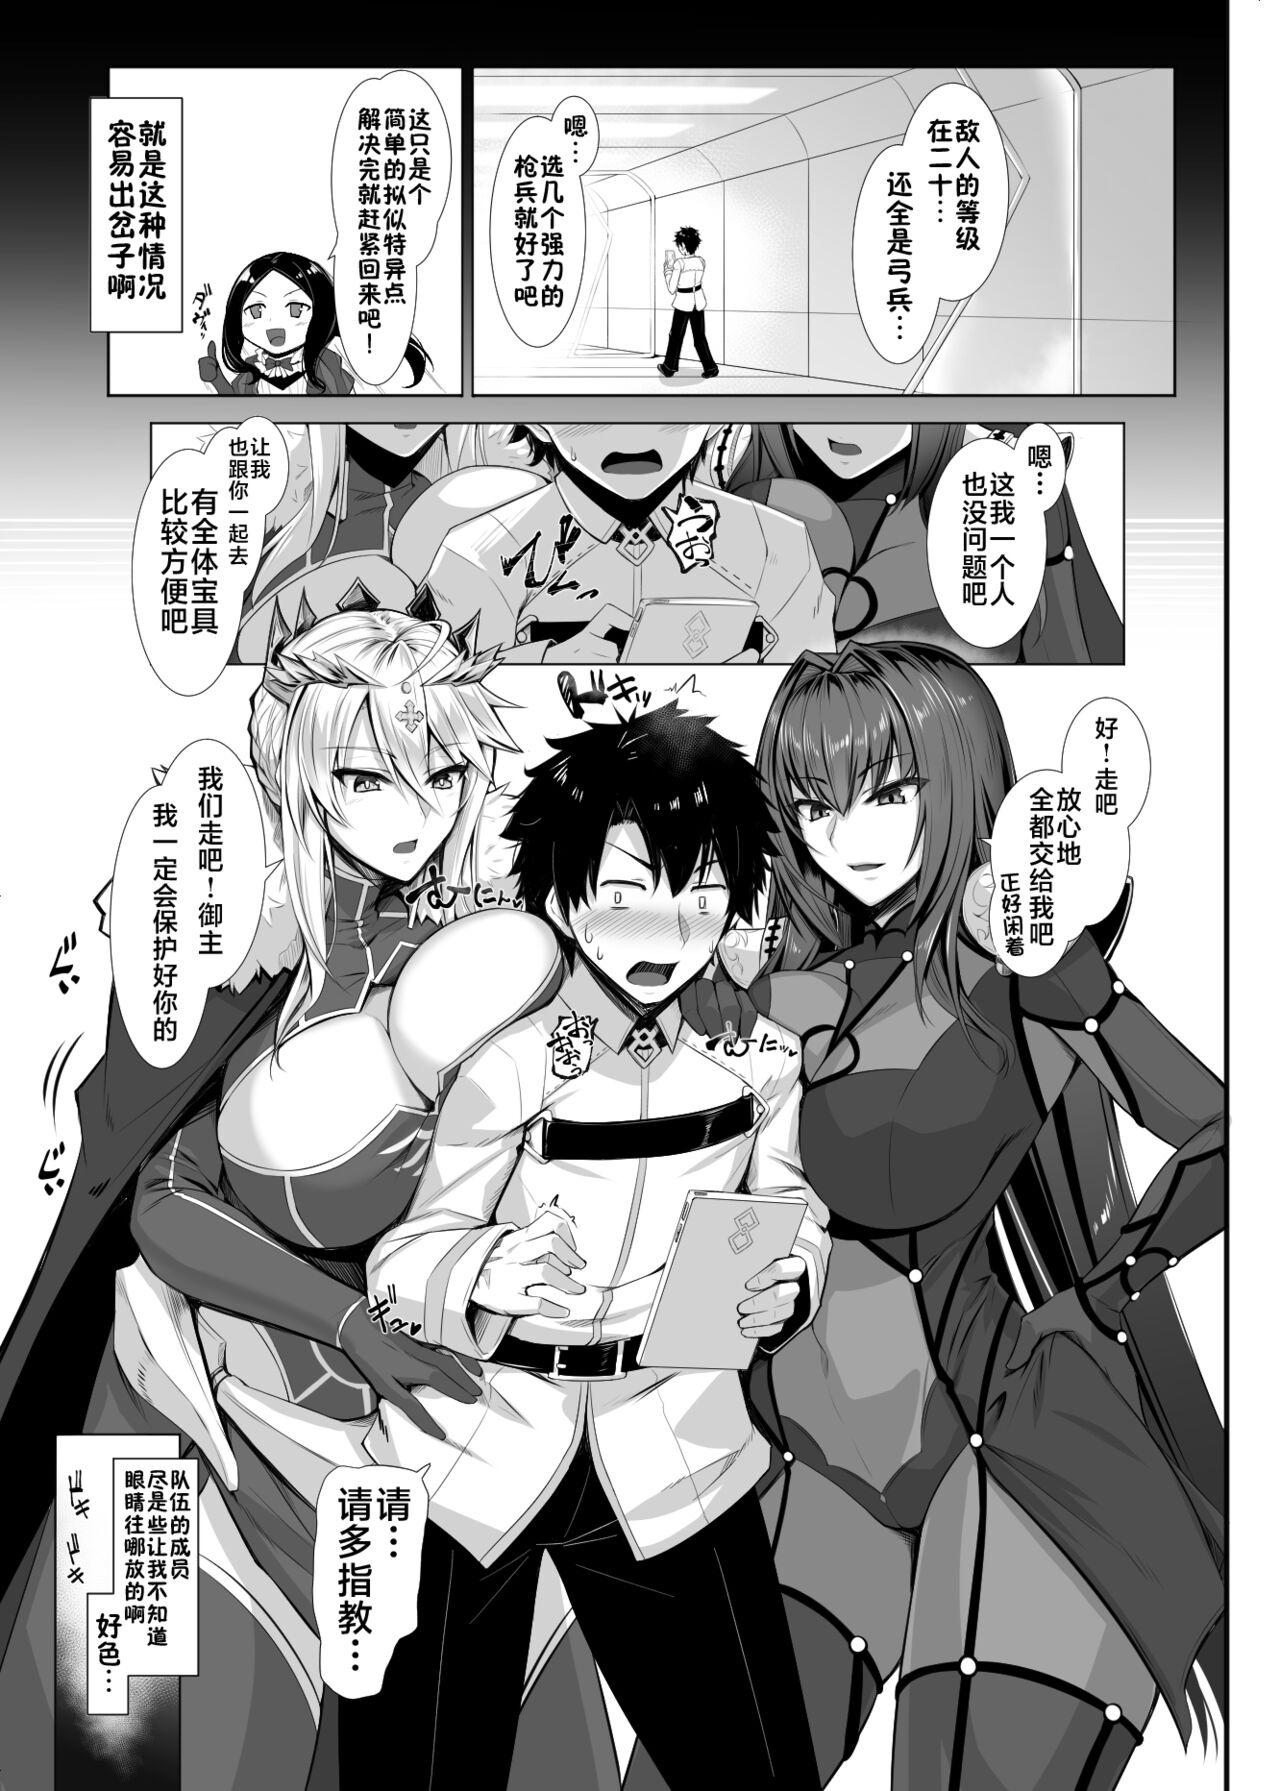 Teenfuns ランランランサーズ - Fate grand order Sesso - Page 2